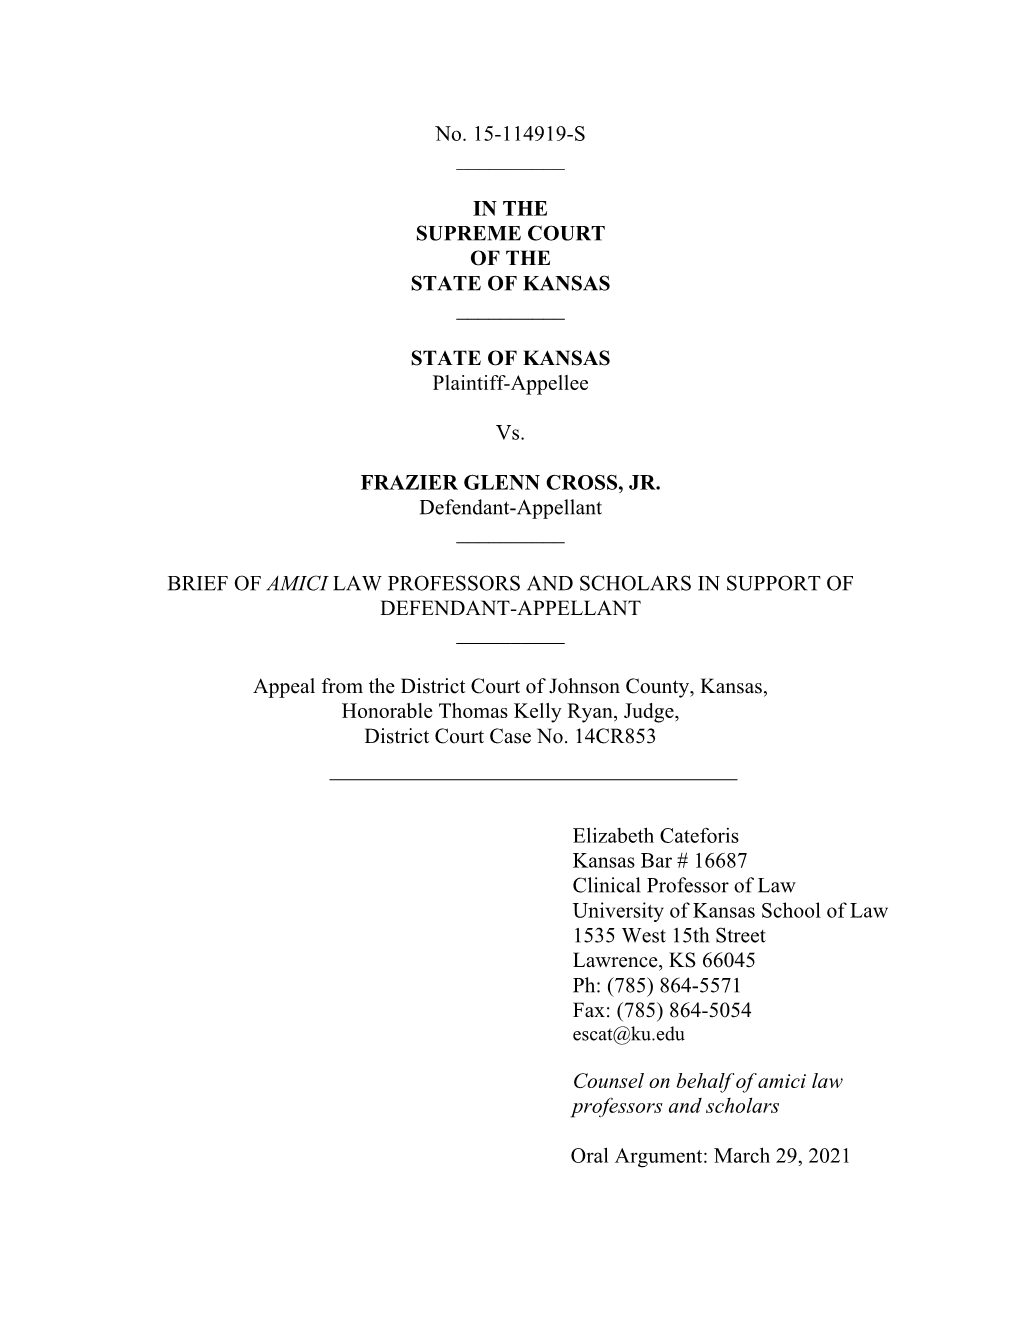 Kansas V. Cross Amicus Brief of Law Professors and Scholars in Support of Defendant-Appellant